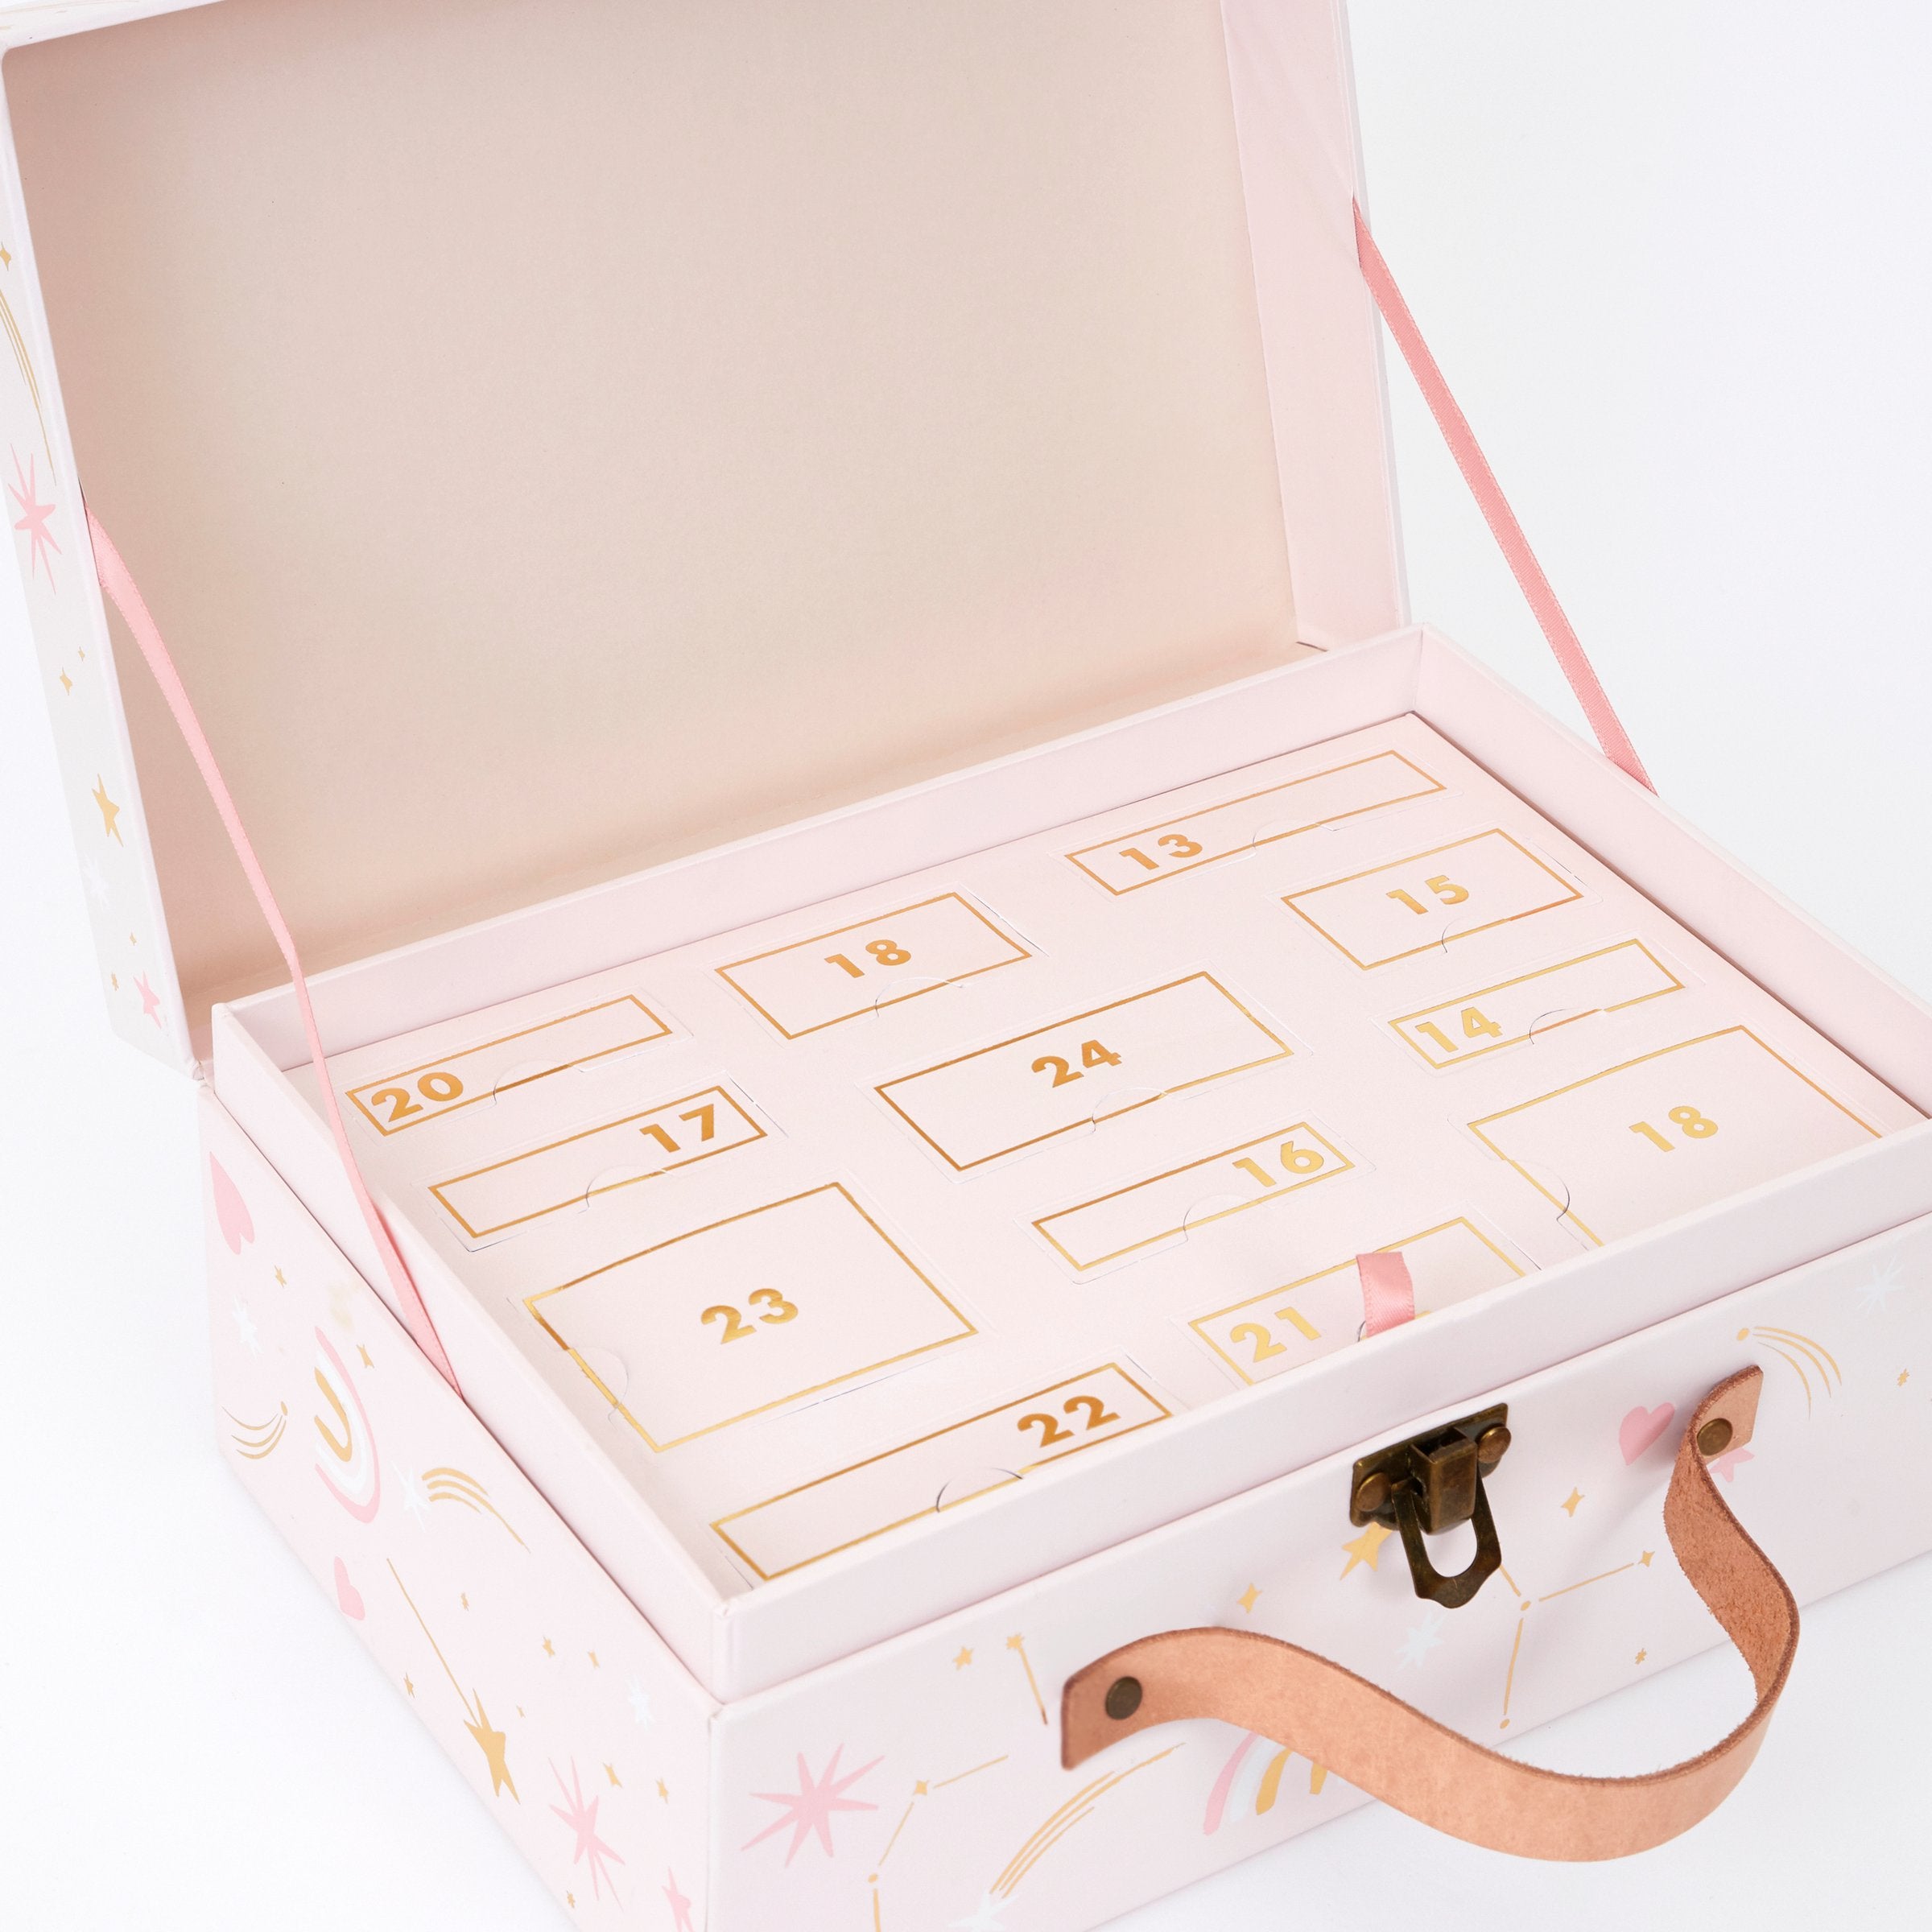 This advent calendar is a mini suitcase filled with kids hair accessories.